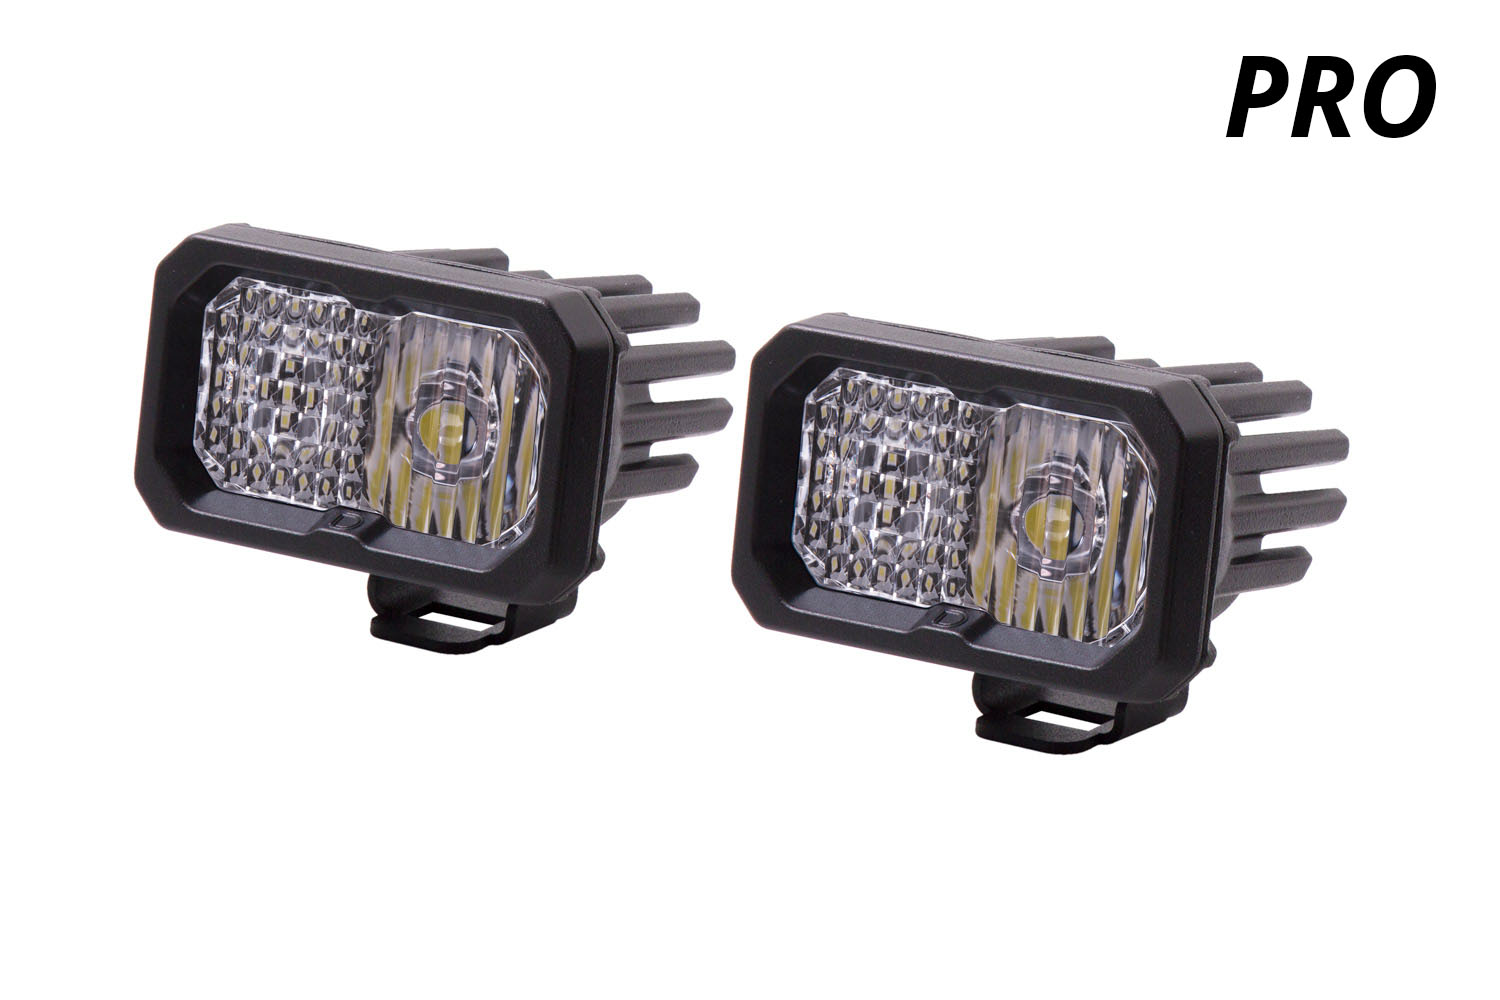 Diode Dynamics Stage Series 2 Inch LED Pod, Pro White Spot Standard ABL Pair